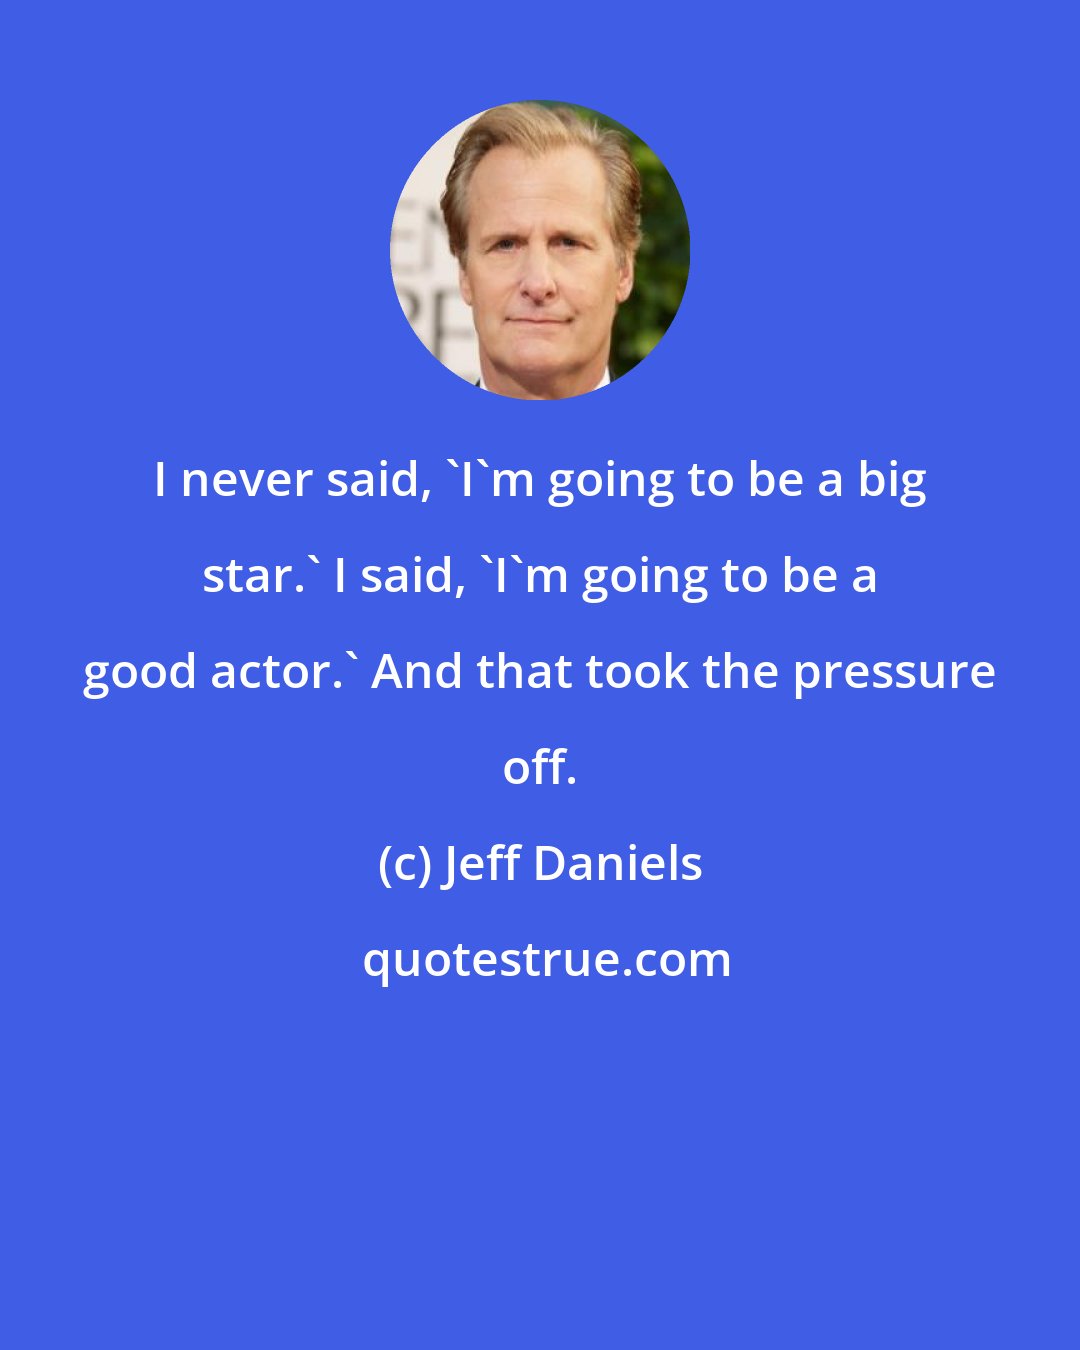 Jeff Daniels: I never said, 'I'm going to be a big star.' I said, 'I'm going to be a good actor.' And that took the pressure off.